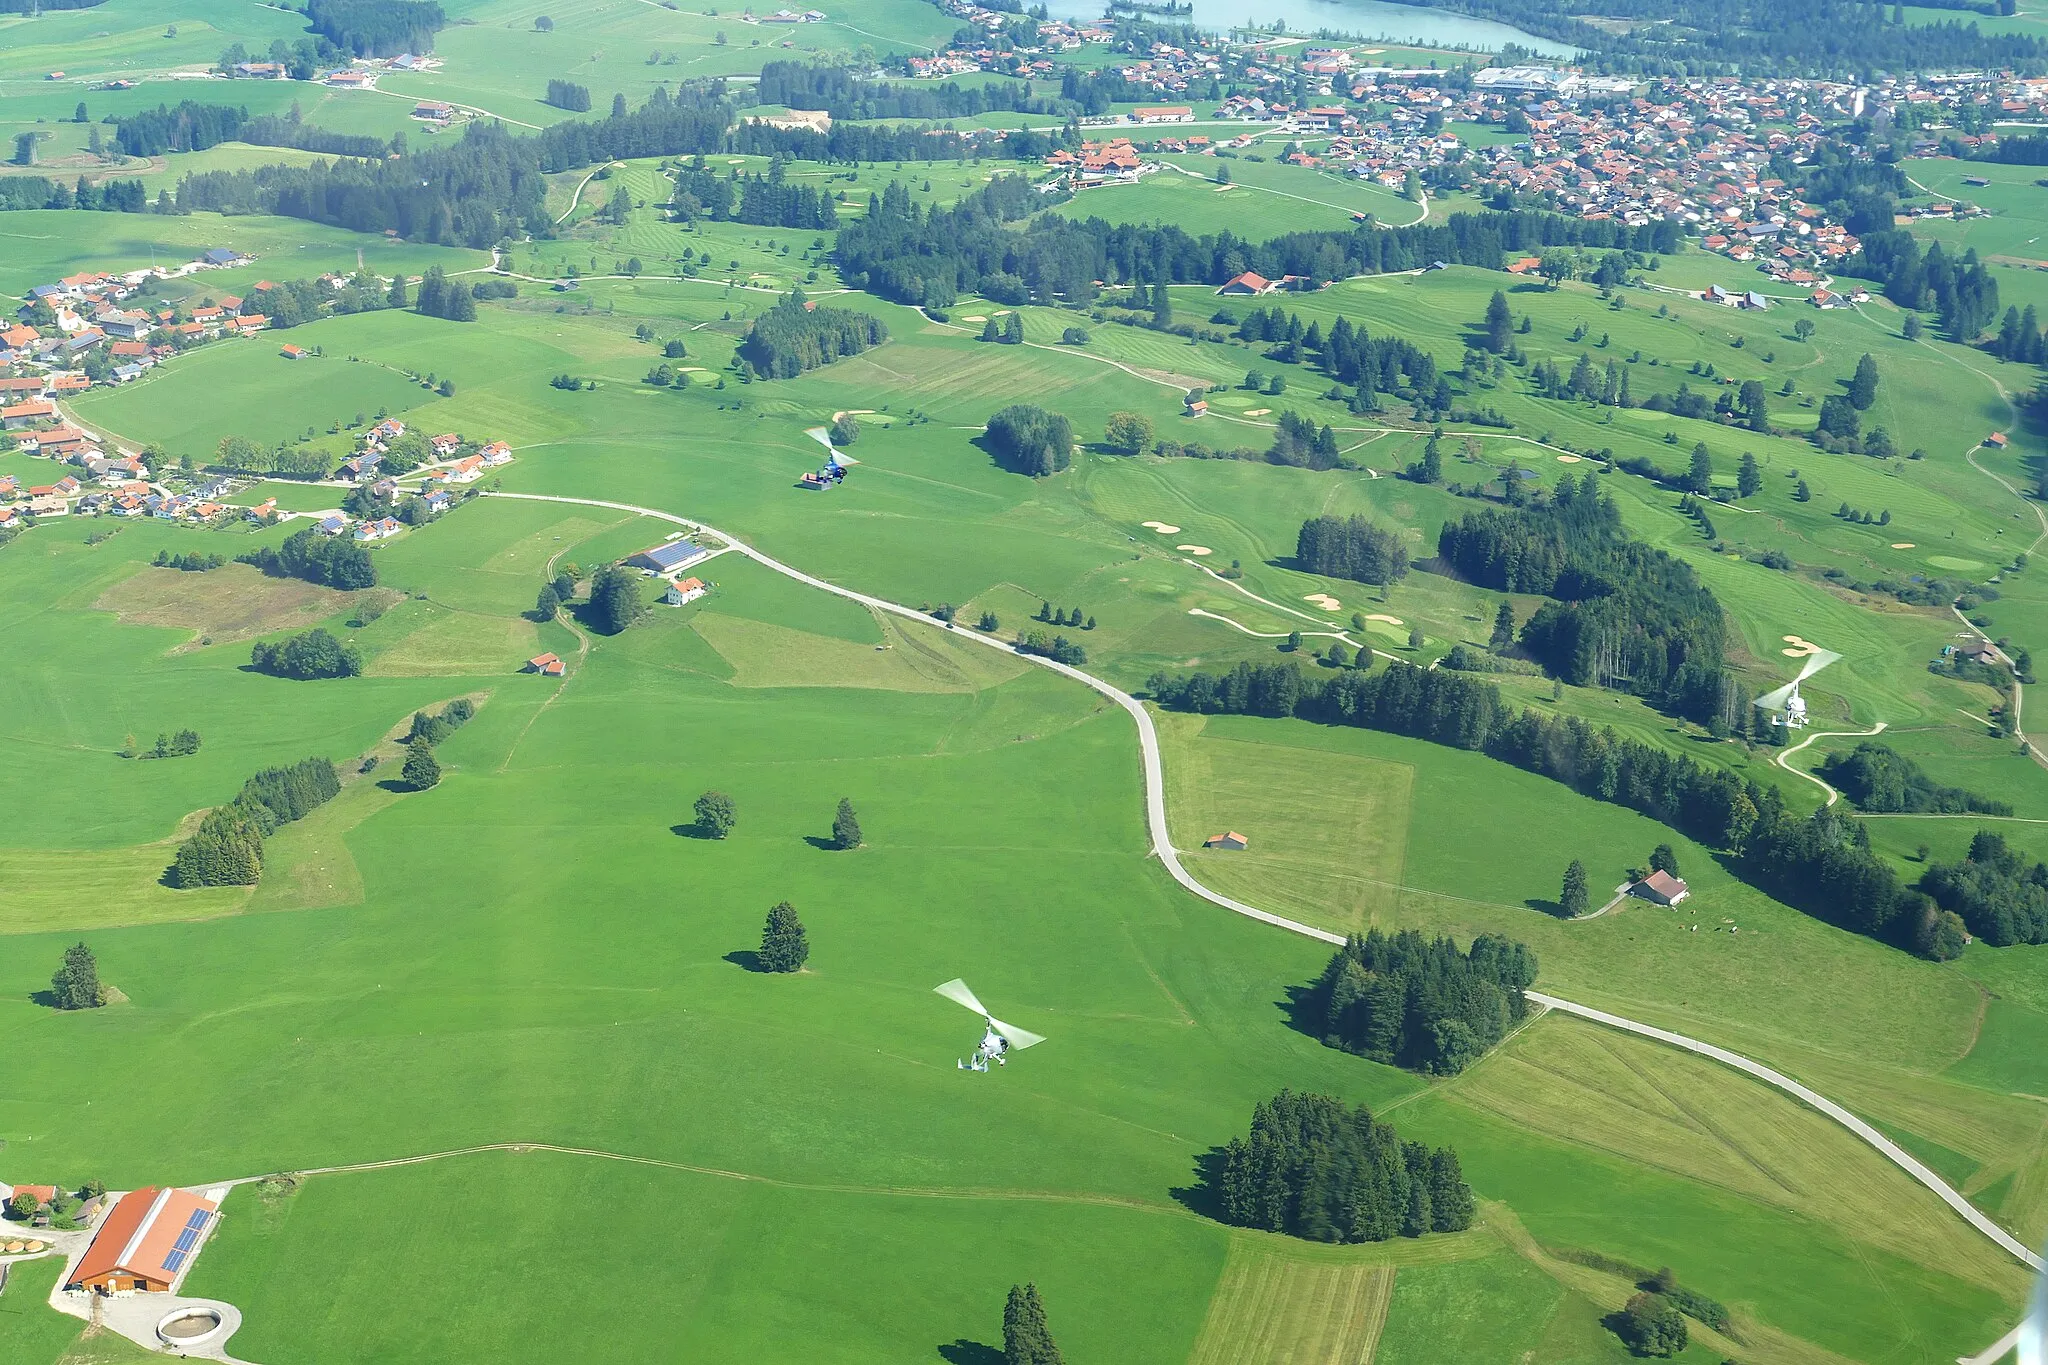 Photo showing: Golf club "Auf der Gsteig" near Lechbruck am See photographed from the gyrocopter at around 4400 feet. In the background above, the village of Lechbruck am See; also visible in the picture: Three gyroplanes in formation flight over the golf course area.